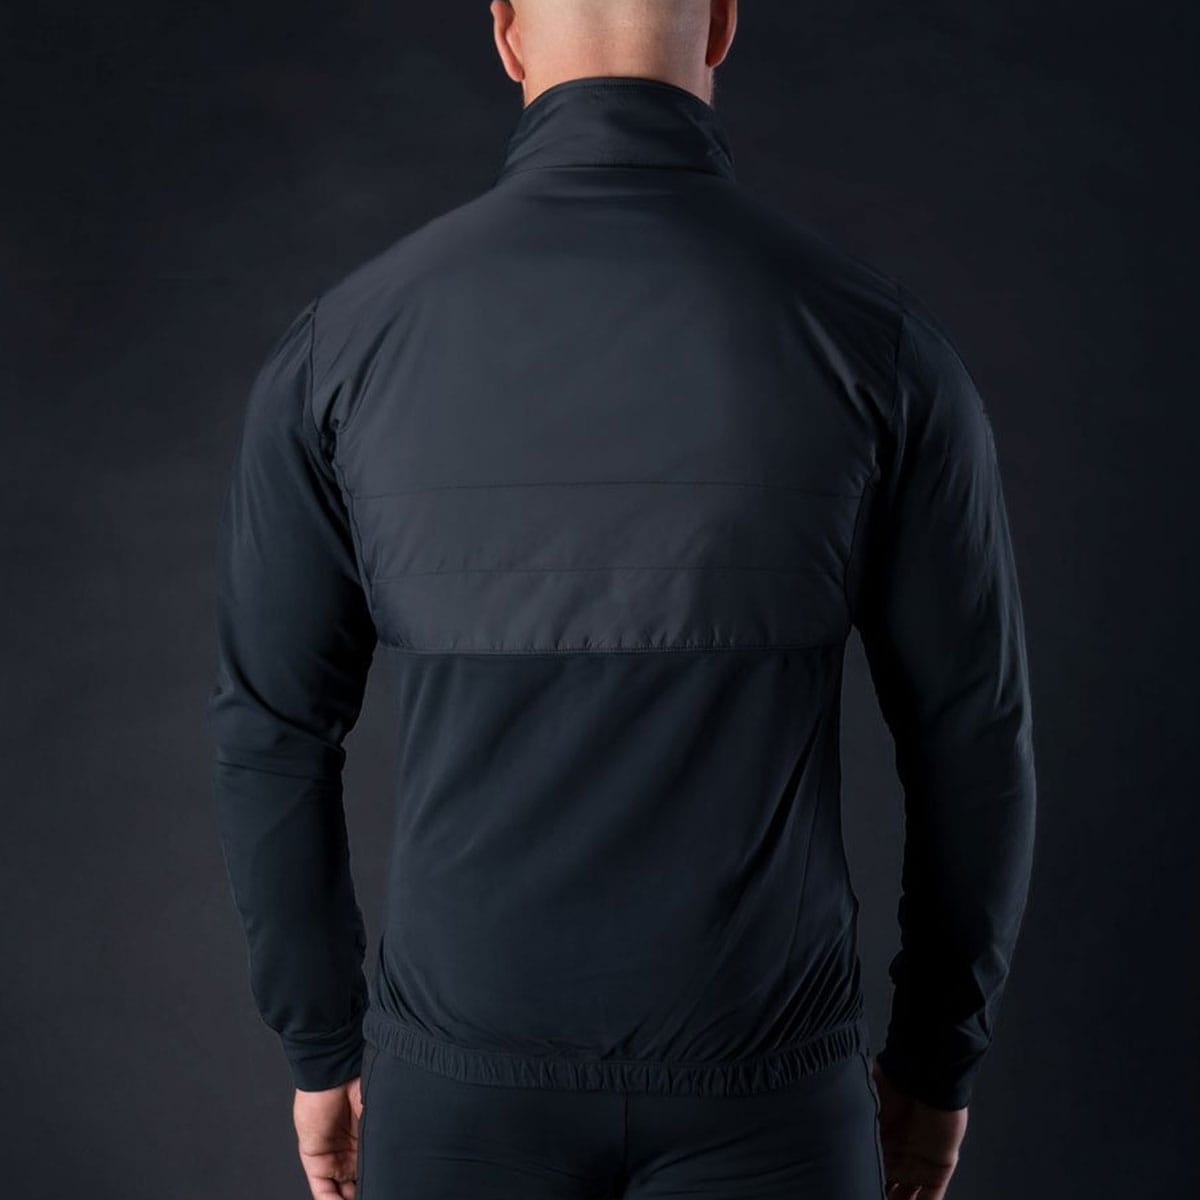 Ride Uncompromised in any Weather Condition: The Oxford Expedition Layer Jacket